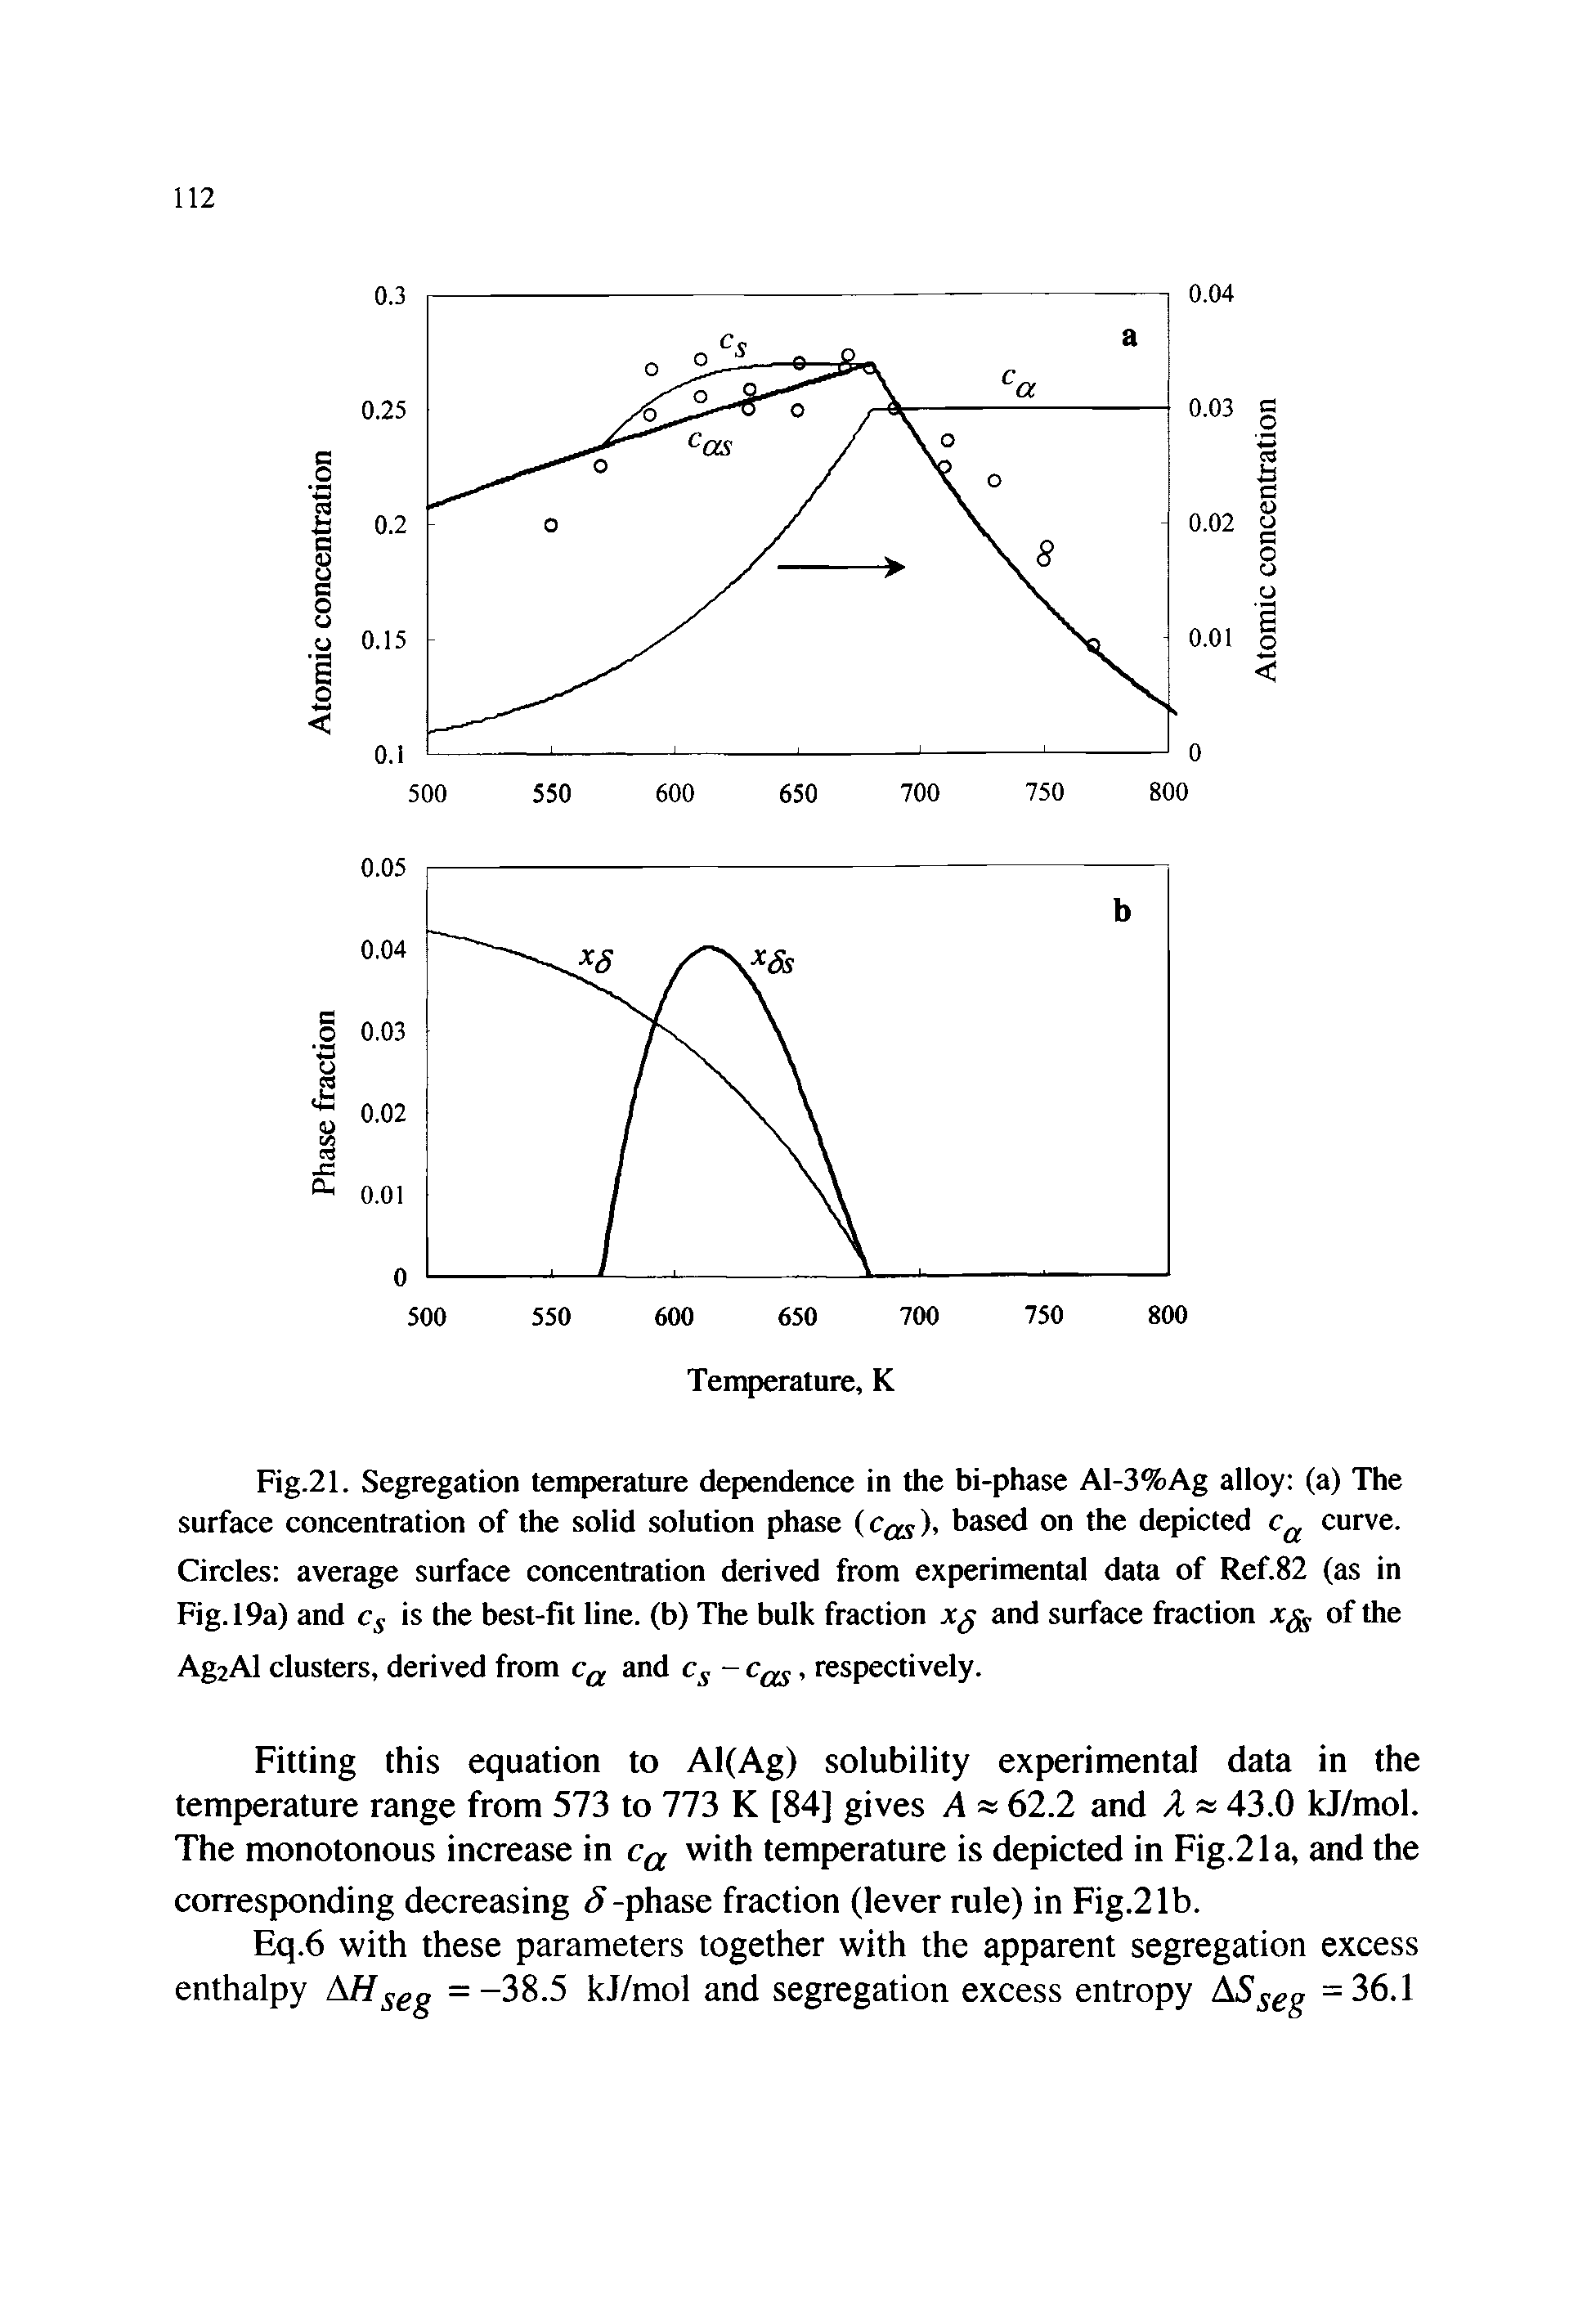 Fig.21. Segregation temperature dependence in the bi-phase Al-3%Ag alloy (a) The surface concentration of the solid solution phase (cqs)> based on the depicted curve. Circles average surface concentration derived from experimental data of Ref.82 (as in Fig. 19a) and Cg is the best-fit line, (b) The bulk fraction xg and surface fraction of the Ag2Al clusters, derived from and Cg -, respectively.